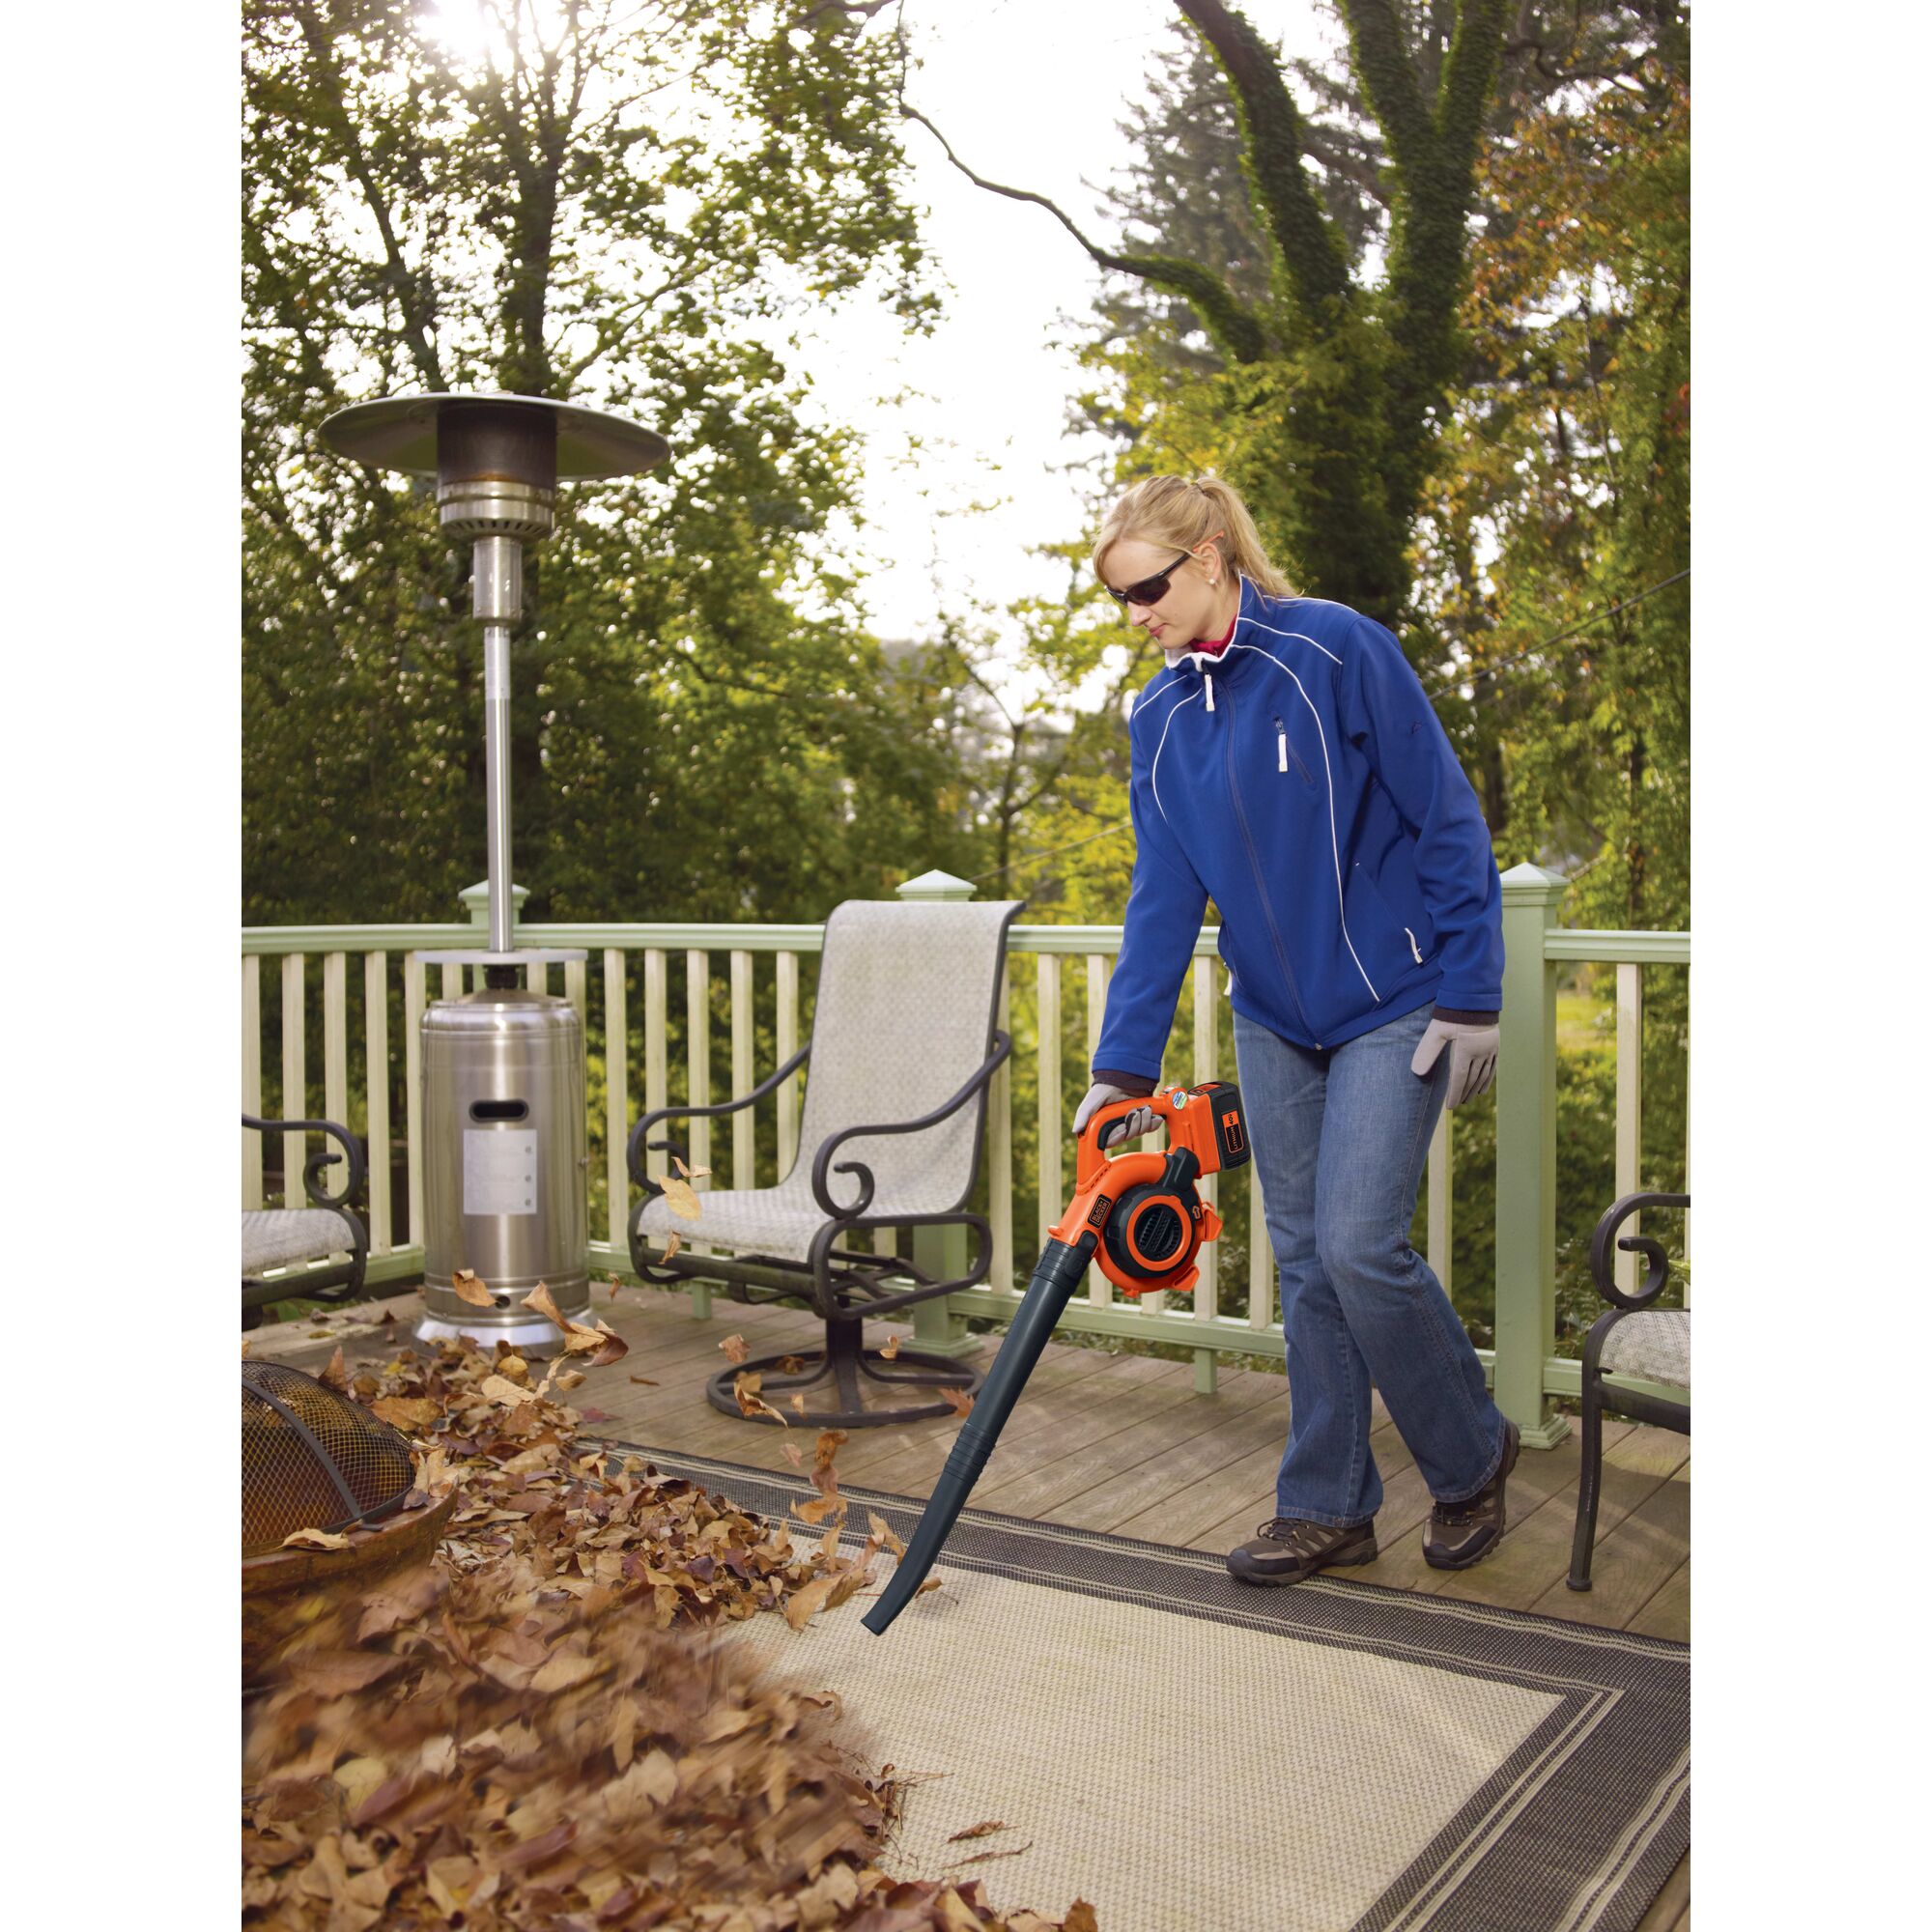 Woman using Cordless Leaf Blower/Vacuum to clear leaves from a deck with outdoor furniture.